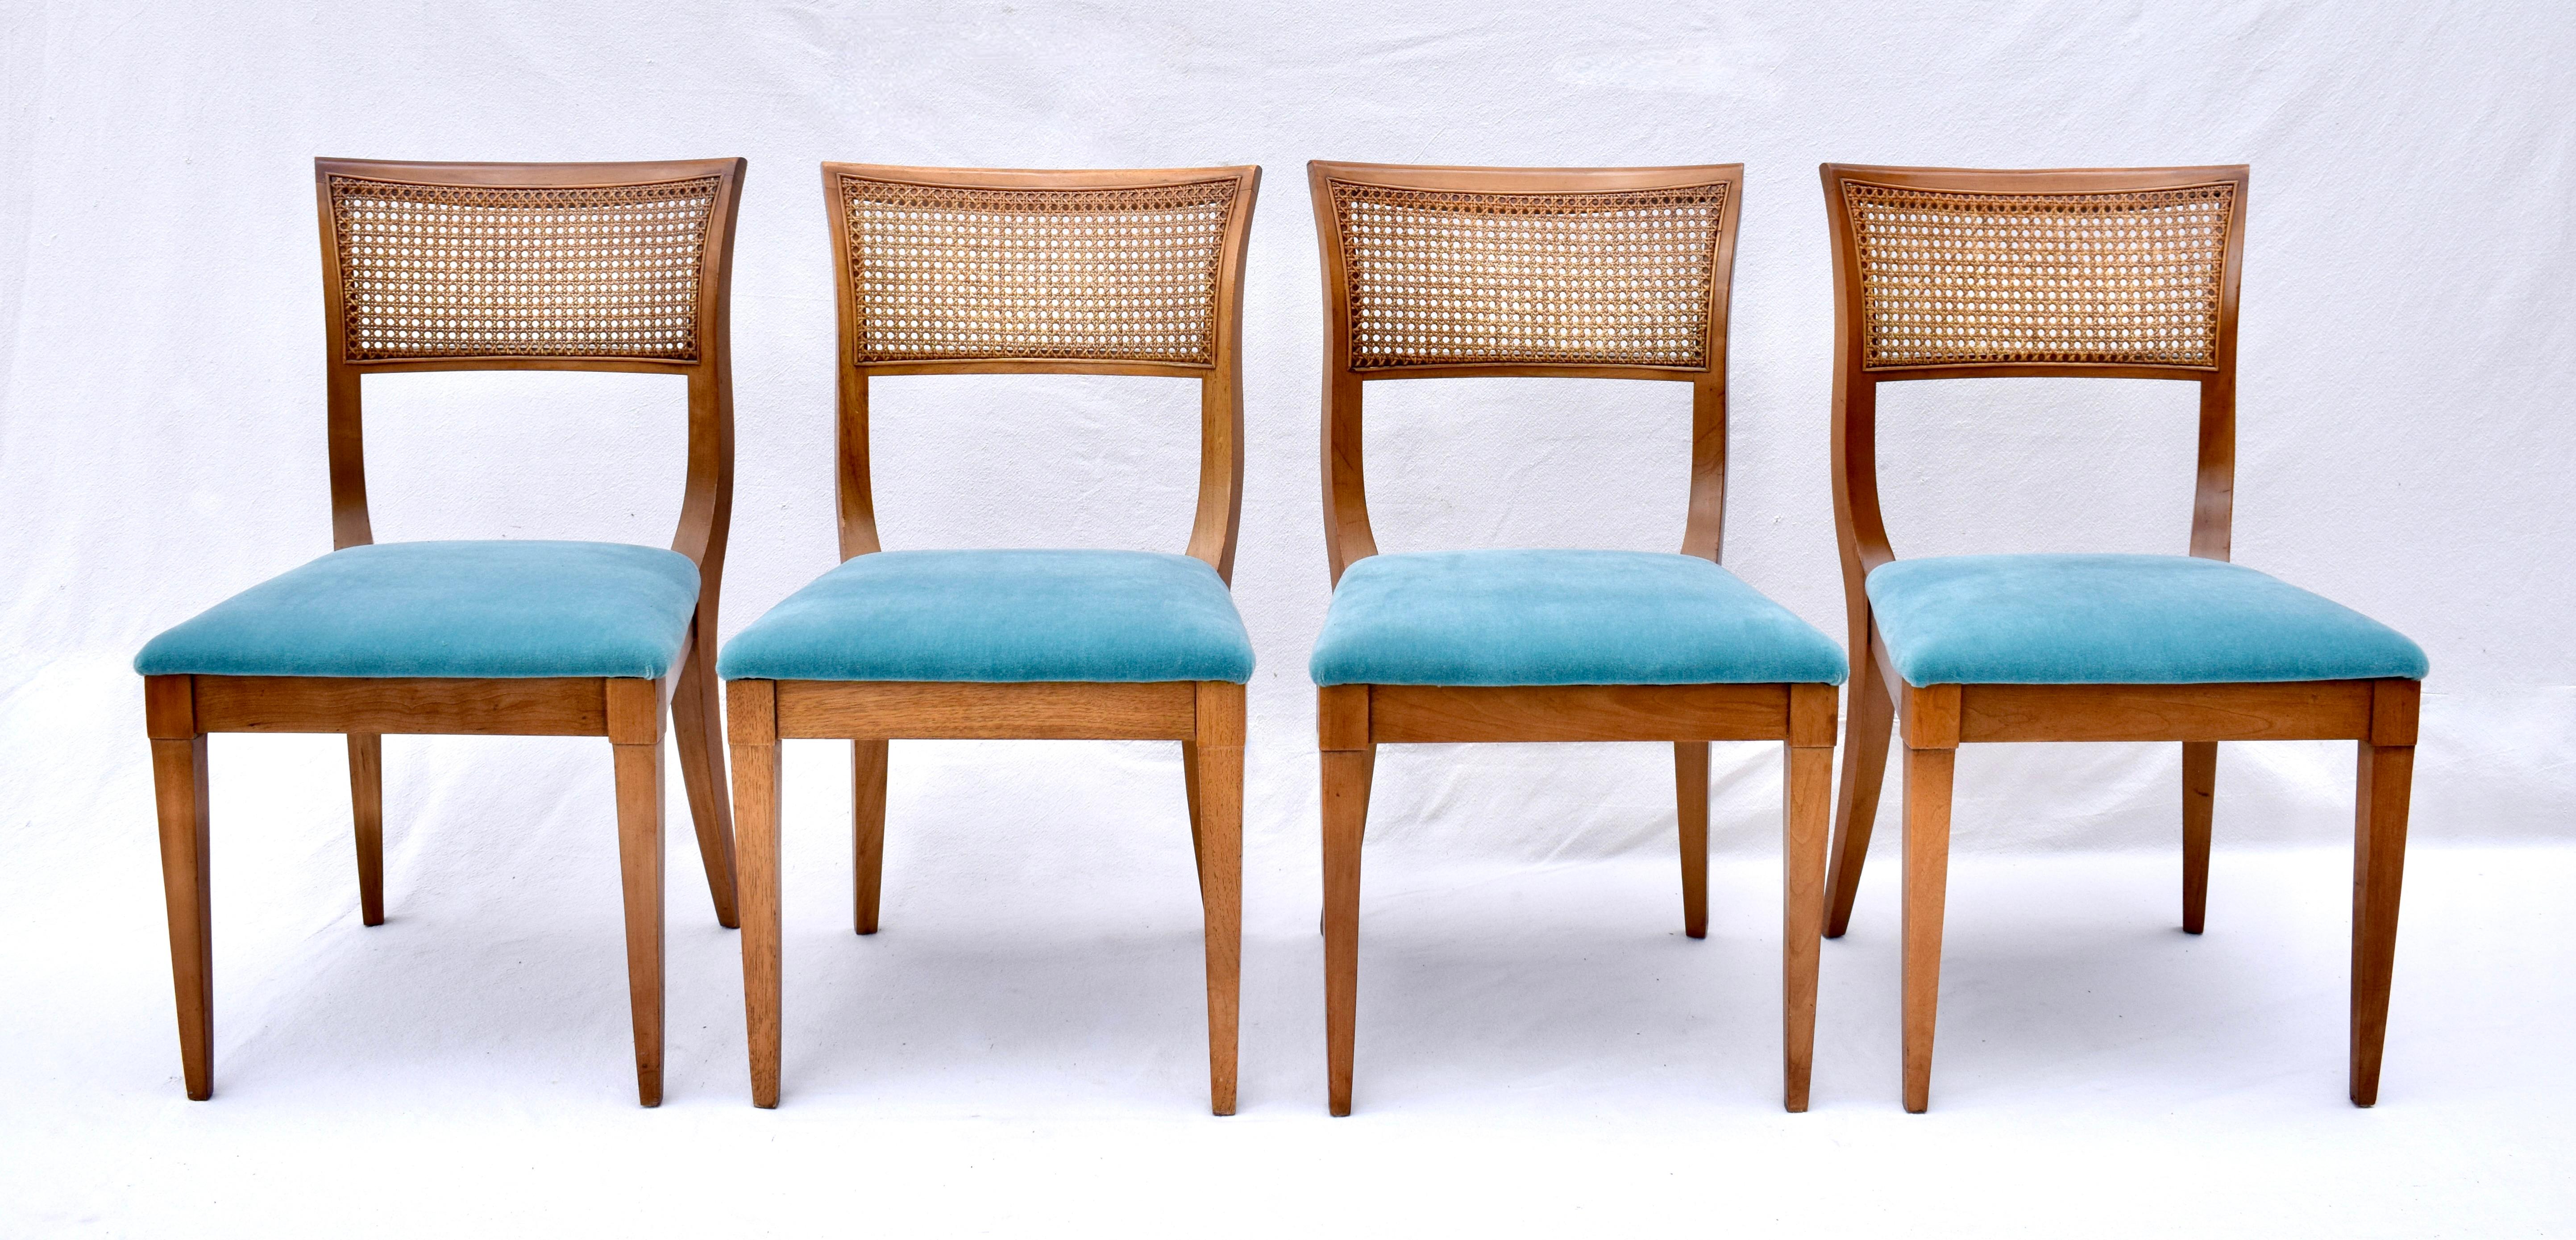 Regency Style Caned Back Dining Chairs in Teal Mohair 3